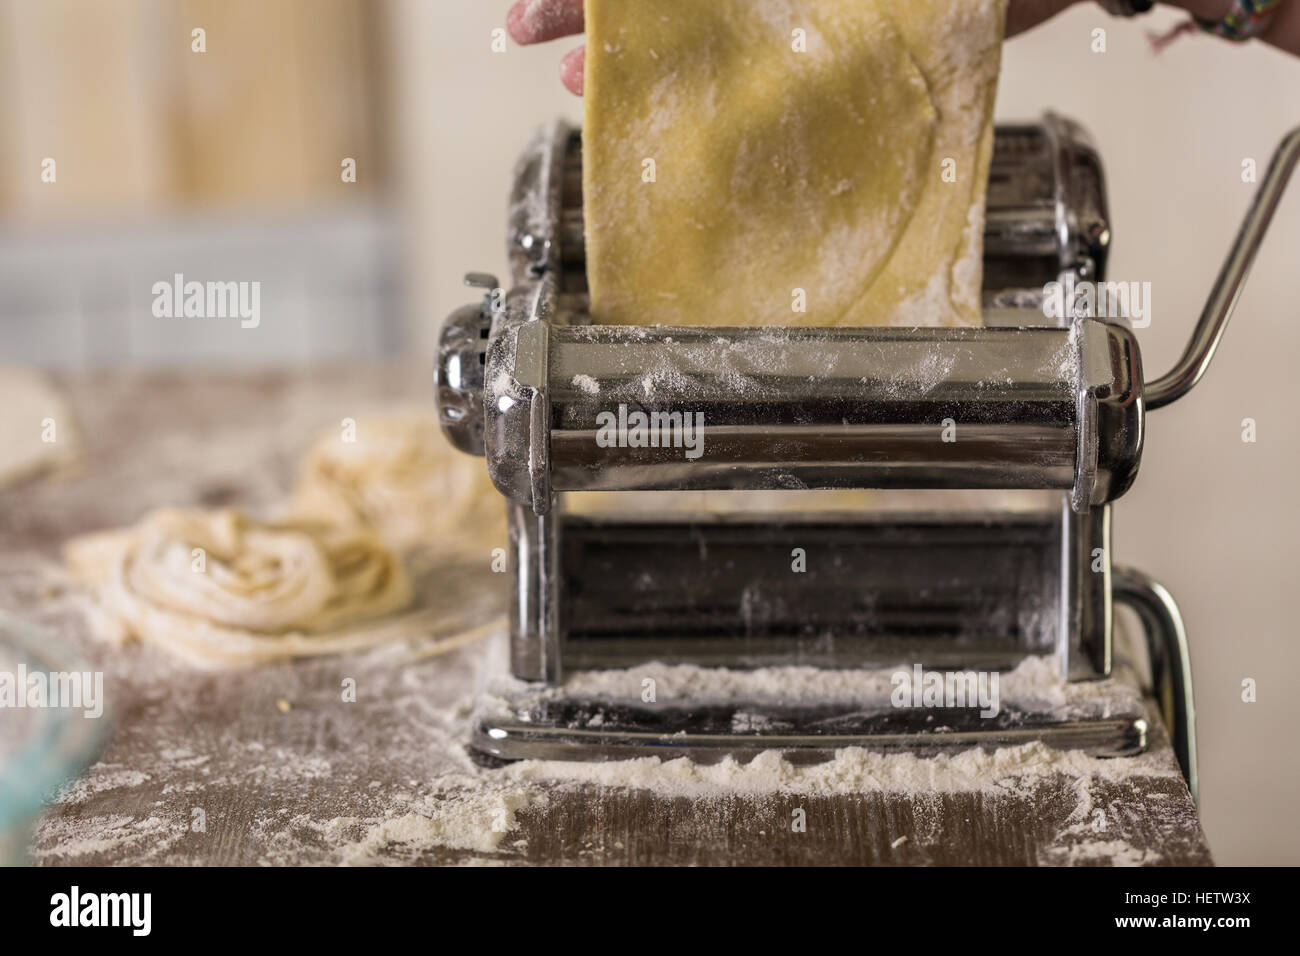 Making Pasta and Tortellini at Home on Wooden Rack and Chrome Pasta Maker  Stock Photo - Alamy